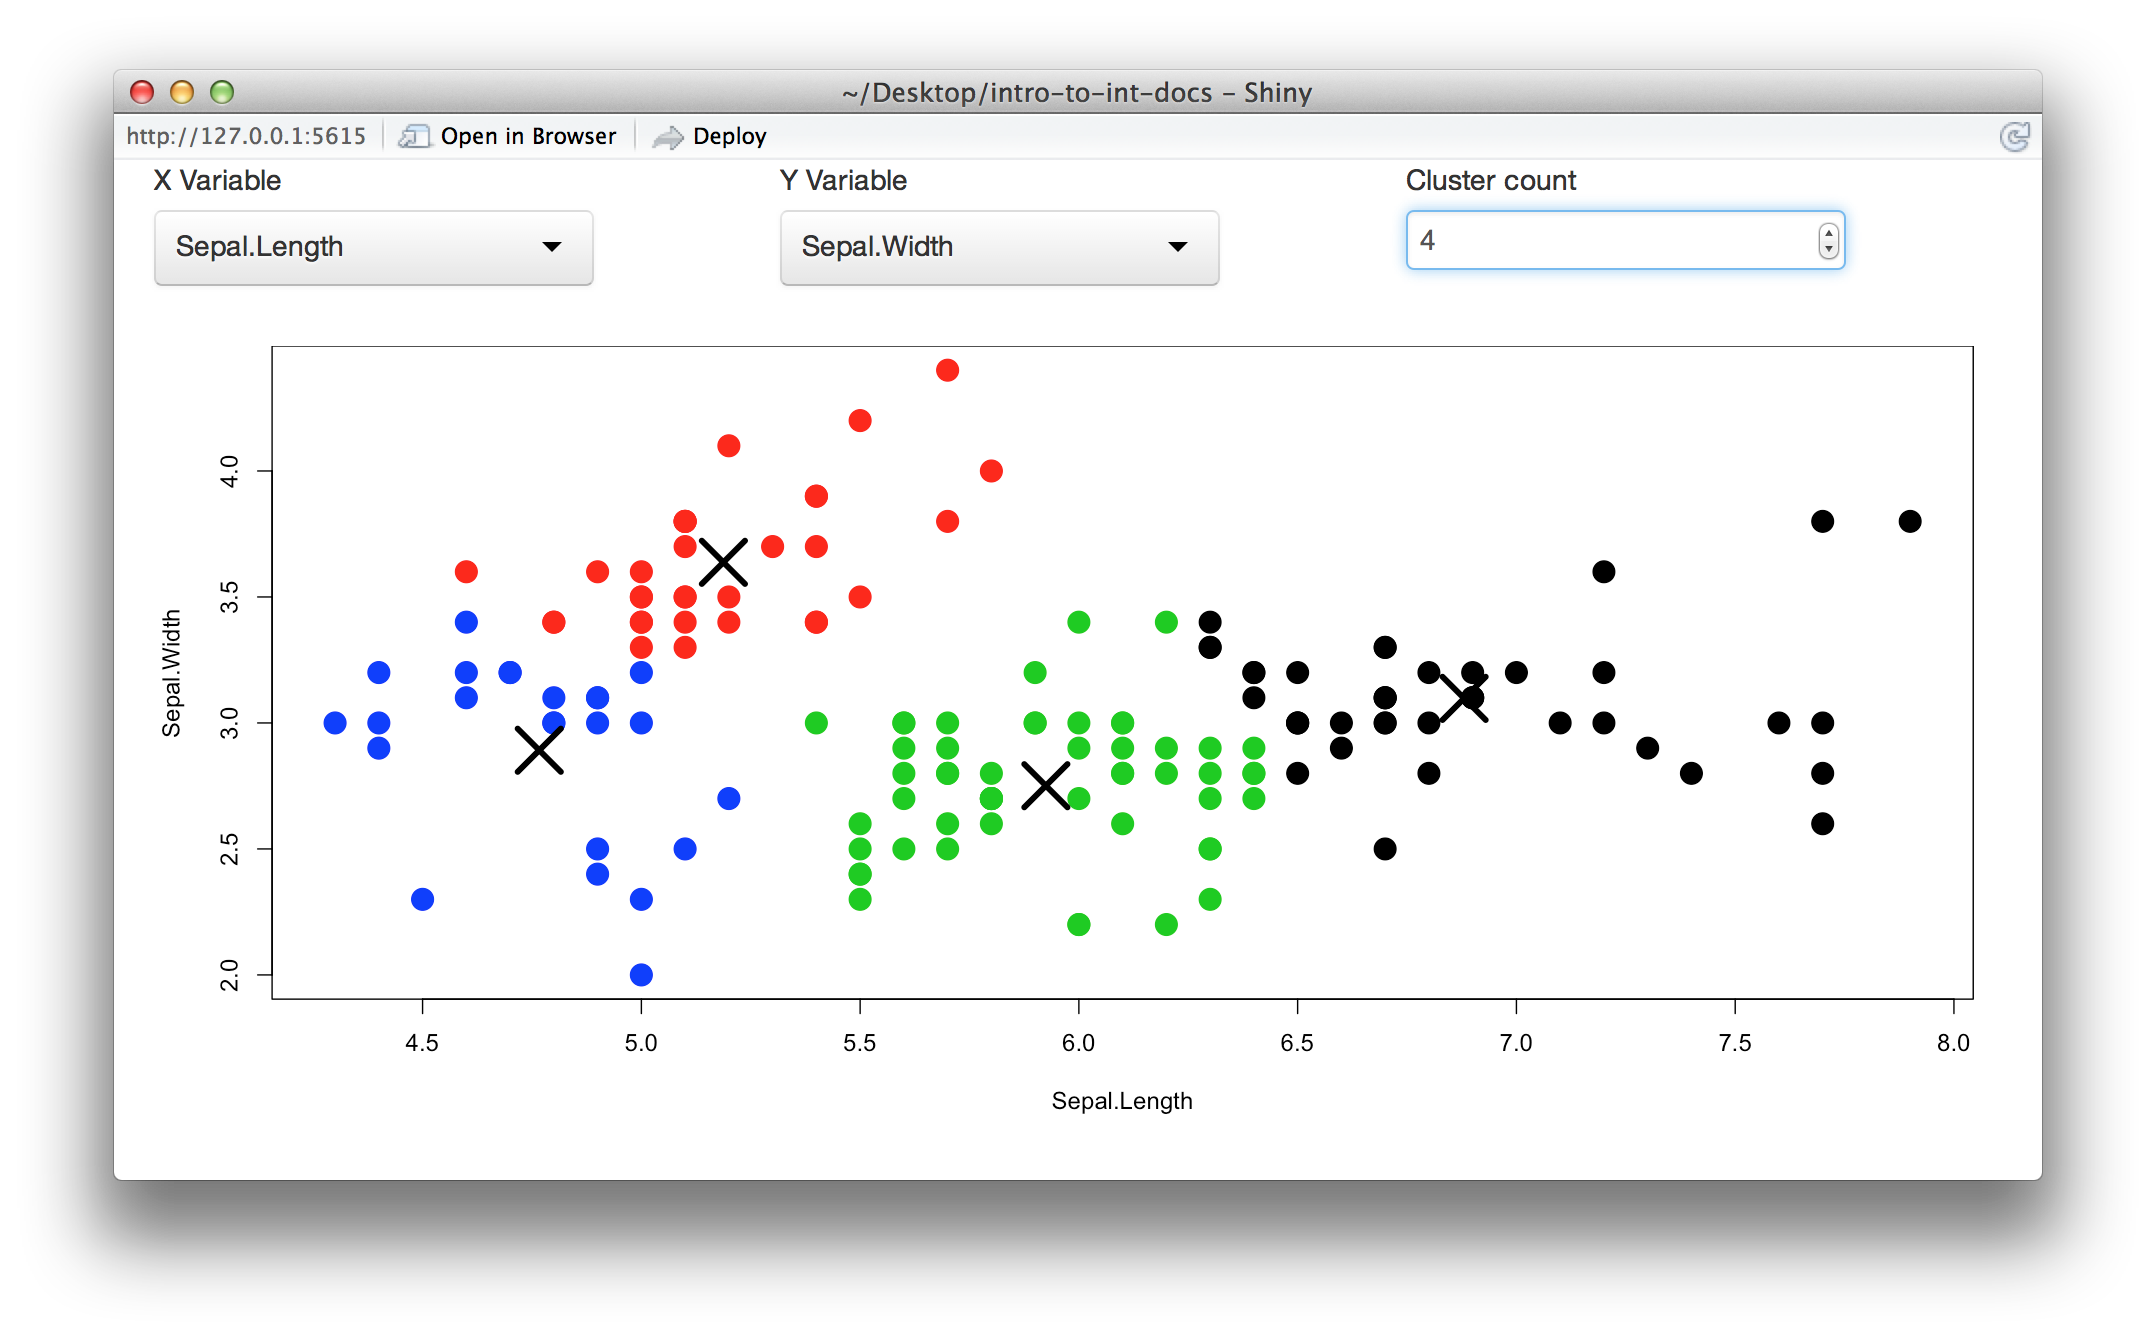 Shiny app with a cluster analysis of the iris dataset